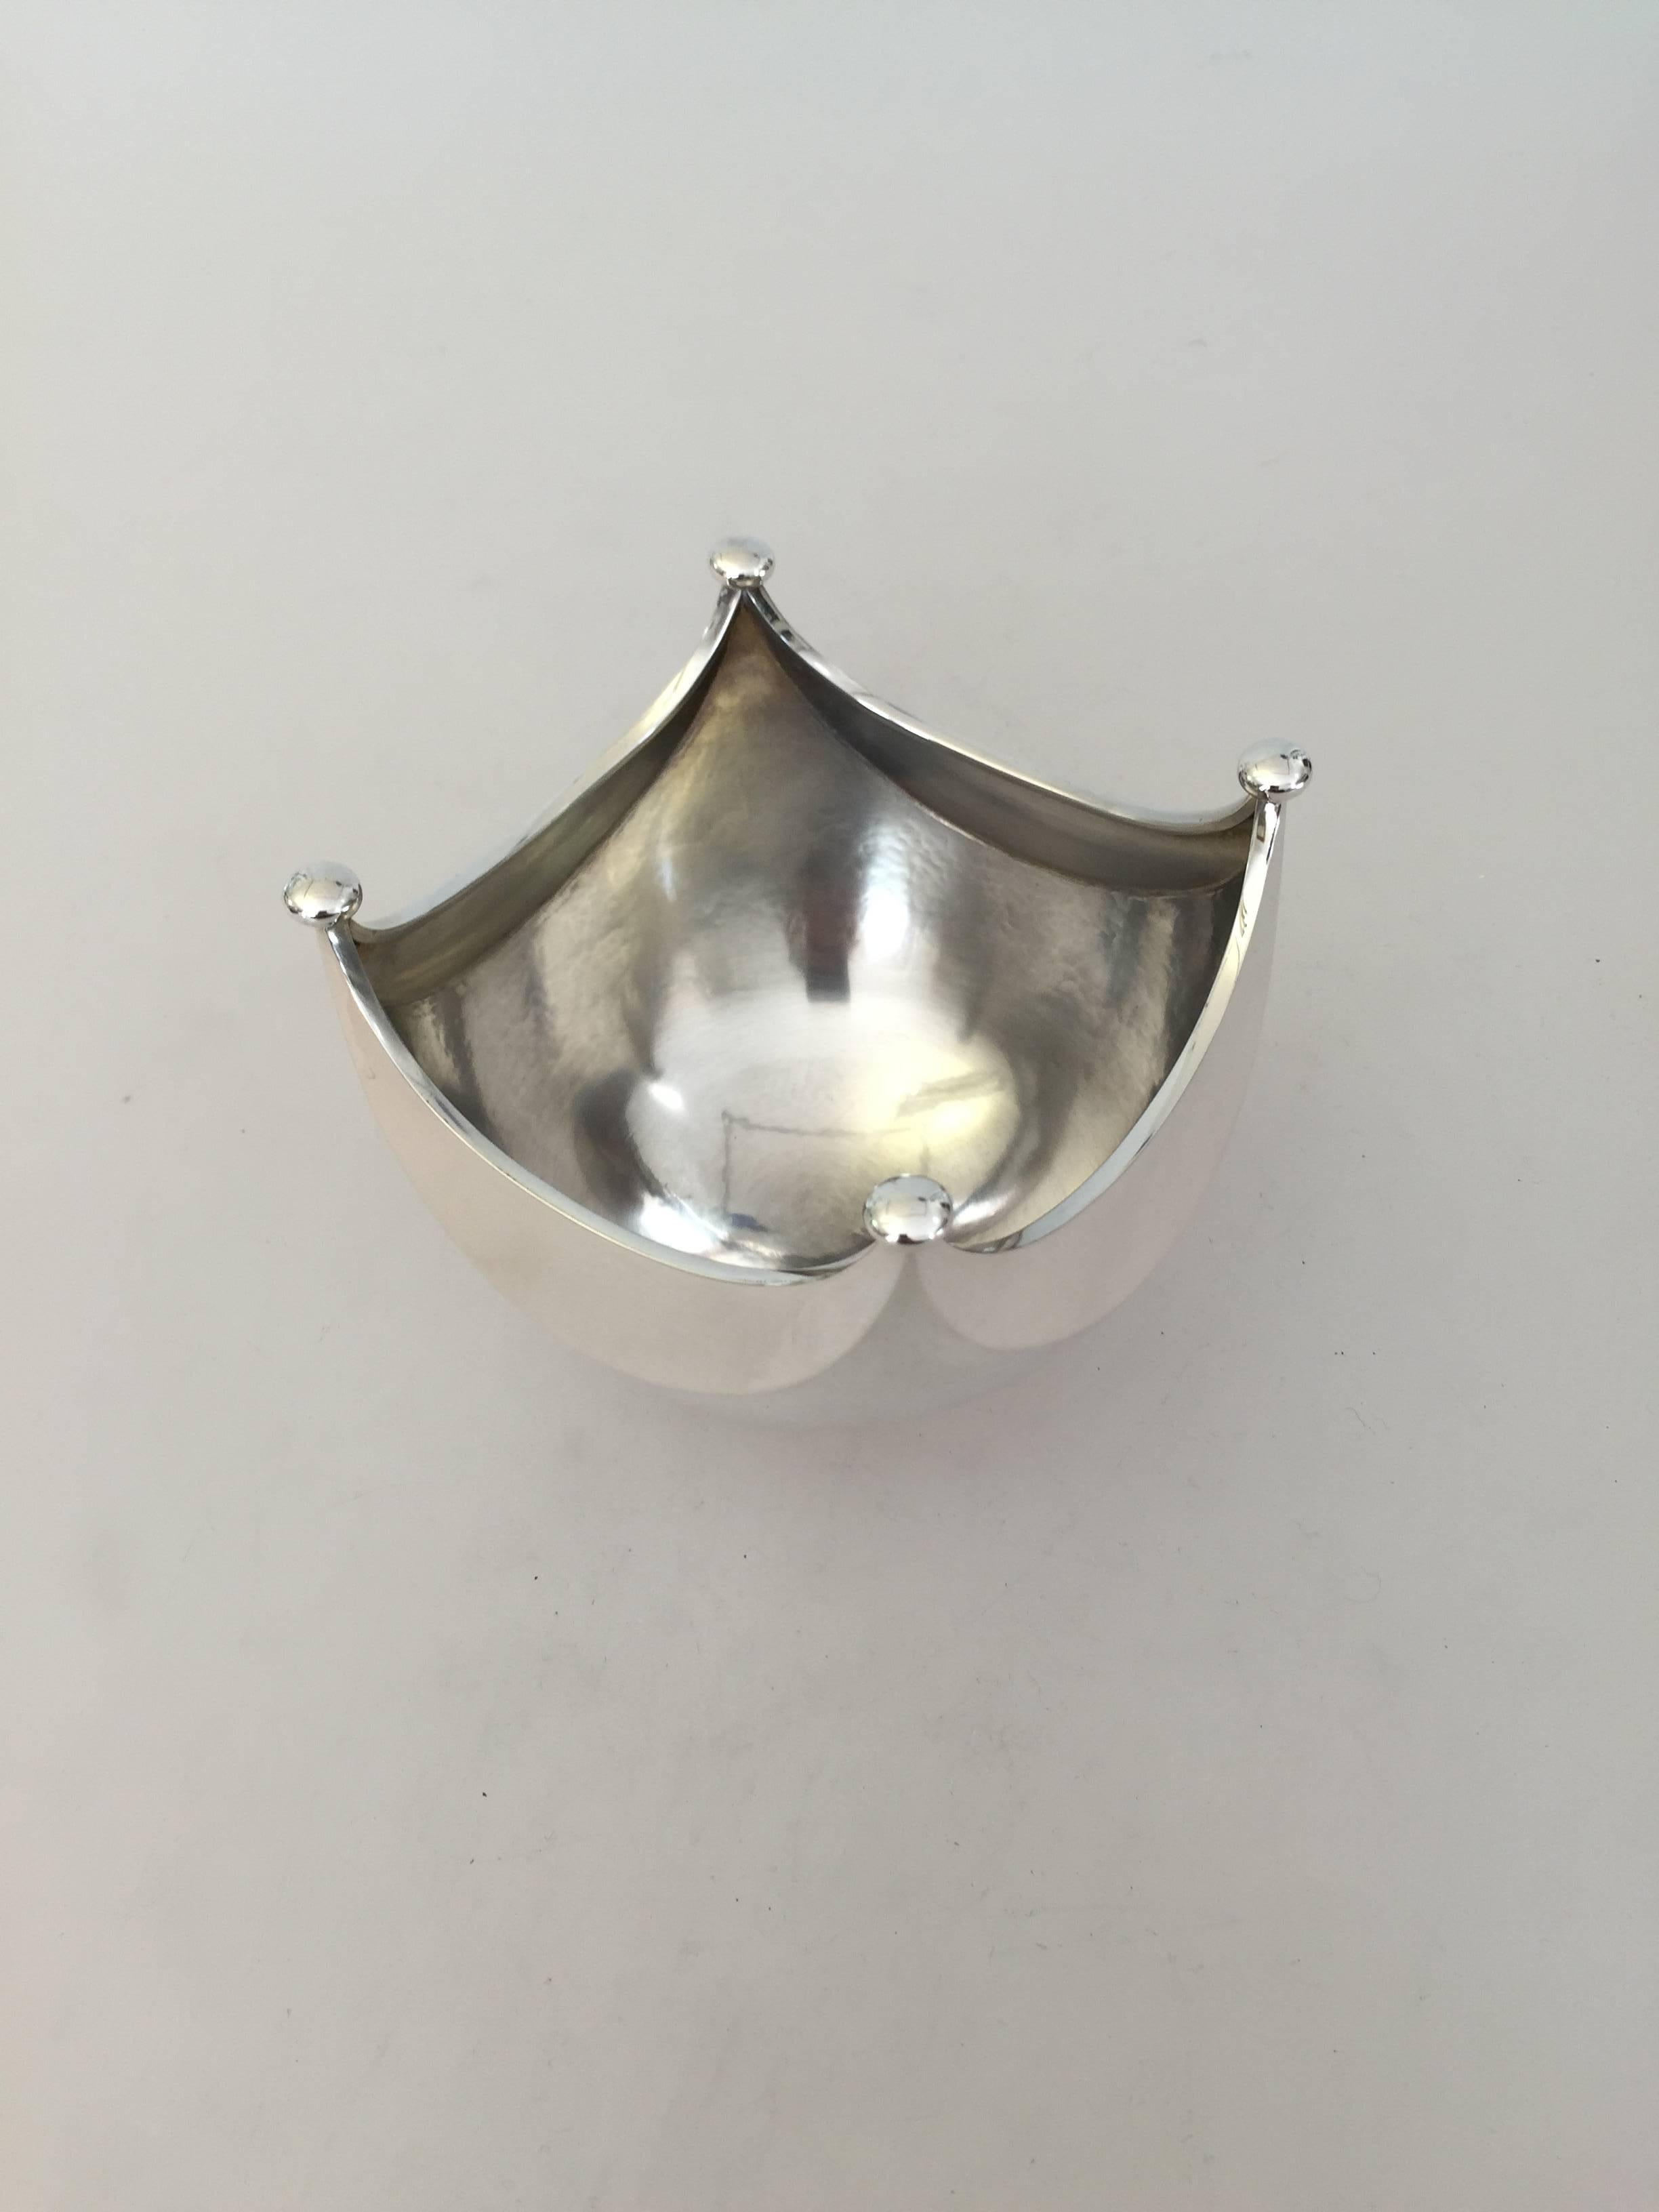 Hans Hansen Sterling Silver Bowl by Karl Gustav Hansen from 1987. The bowl is #25 out of 100 made. It measures 9.5 cm high and is in perfect condition.

Hans Hansen (1884-1940) was a Danish silversmithy. He opened his own smithy and shop in